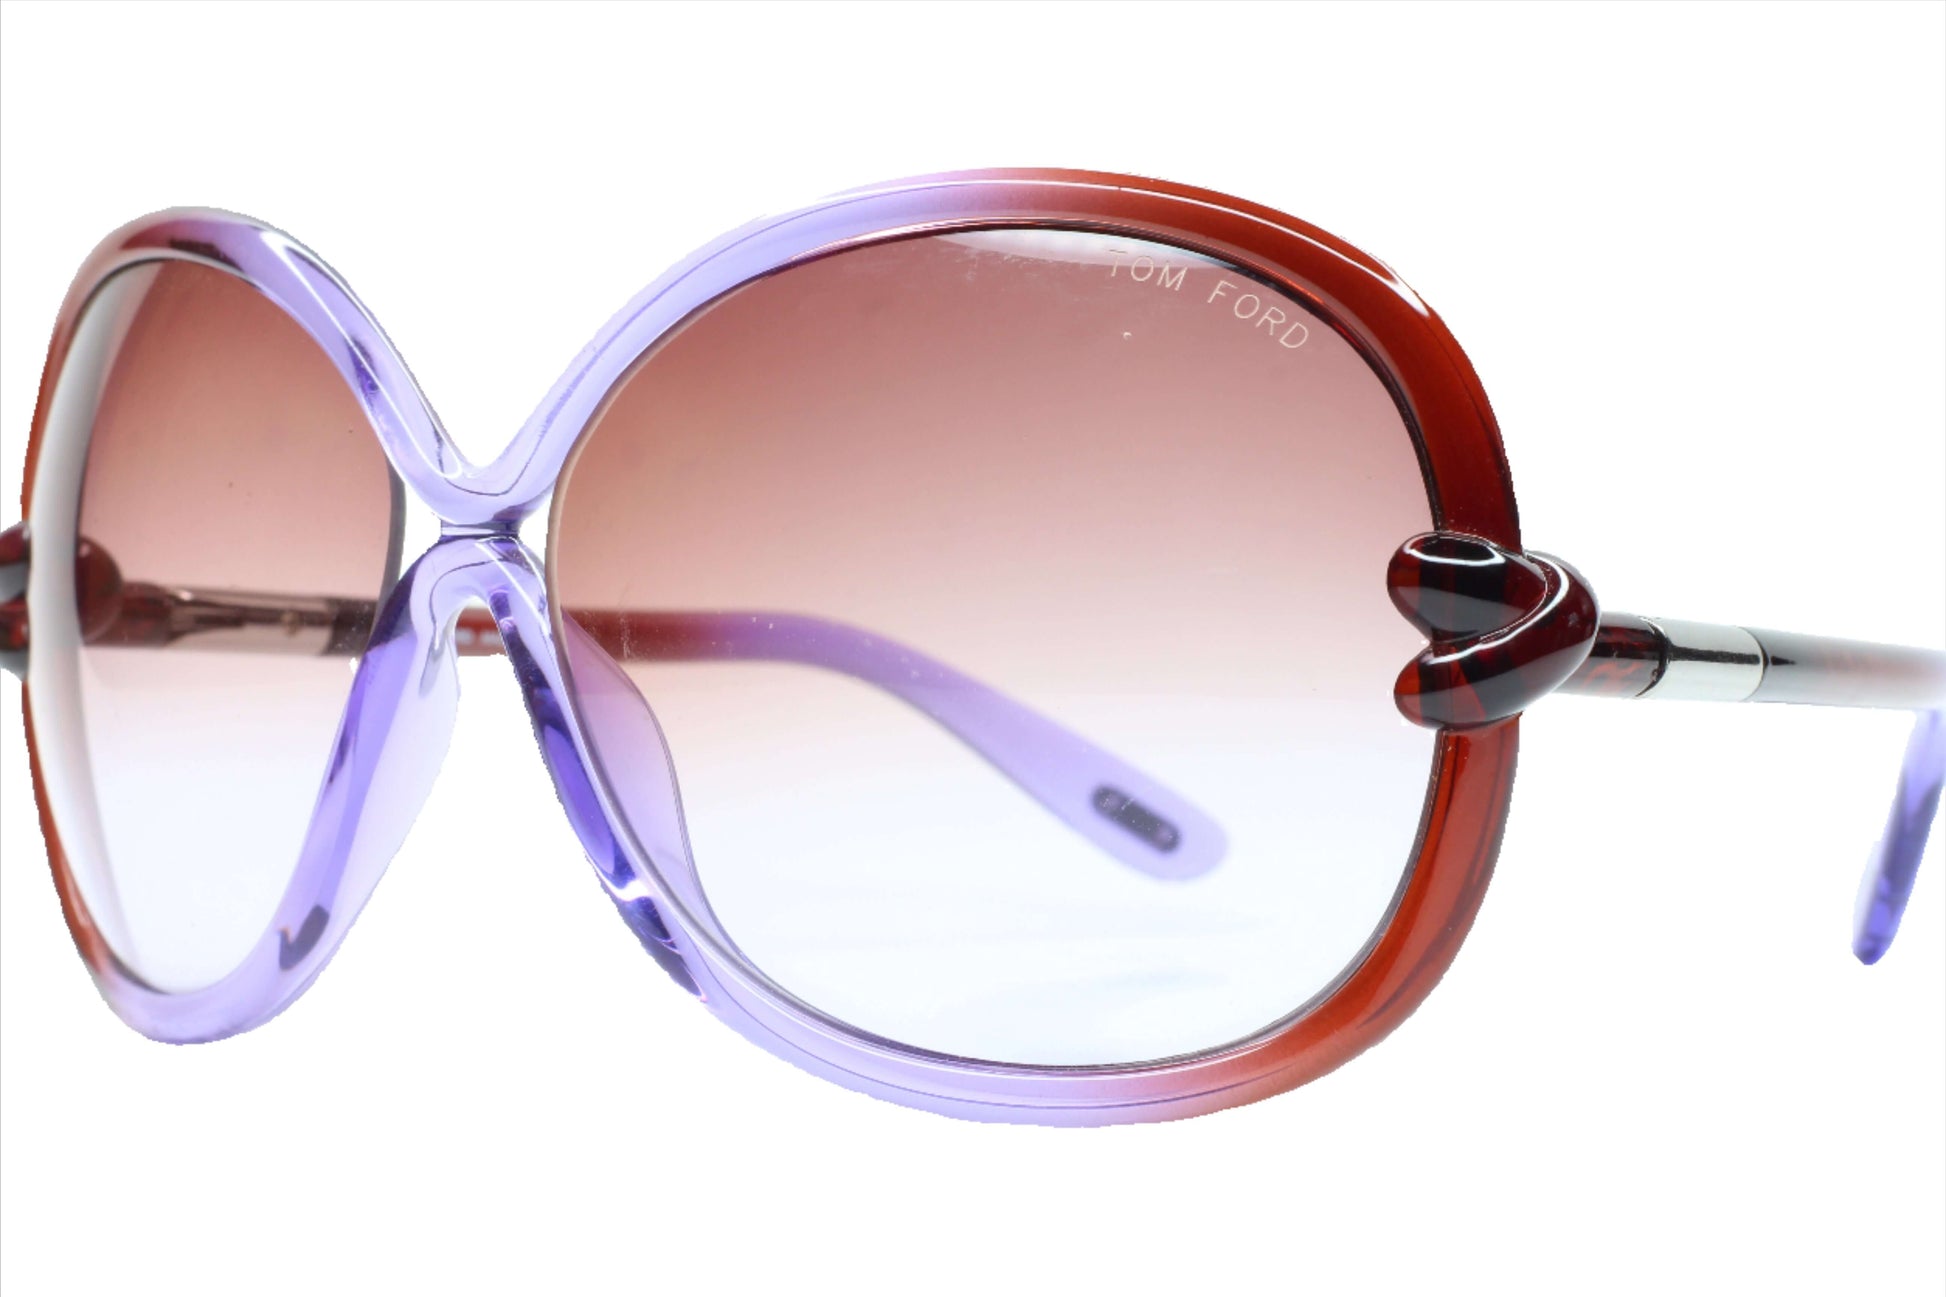 Tom Ford TF185 83Z Sonja Purple and Brown Sunglasses - 64mm